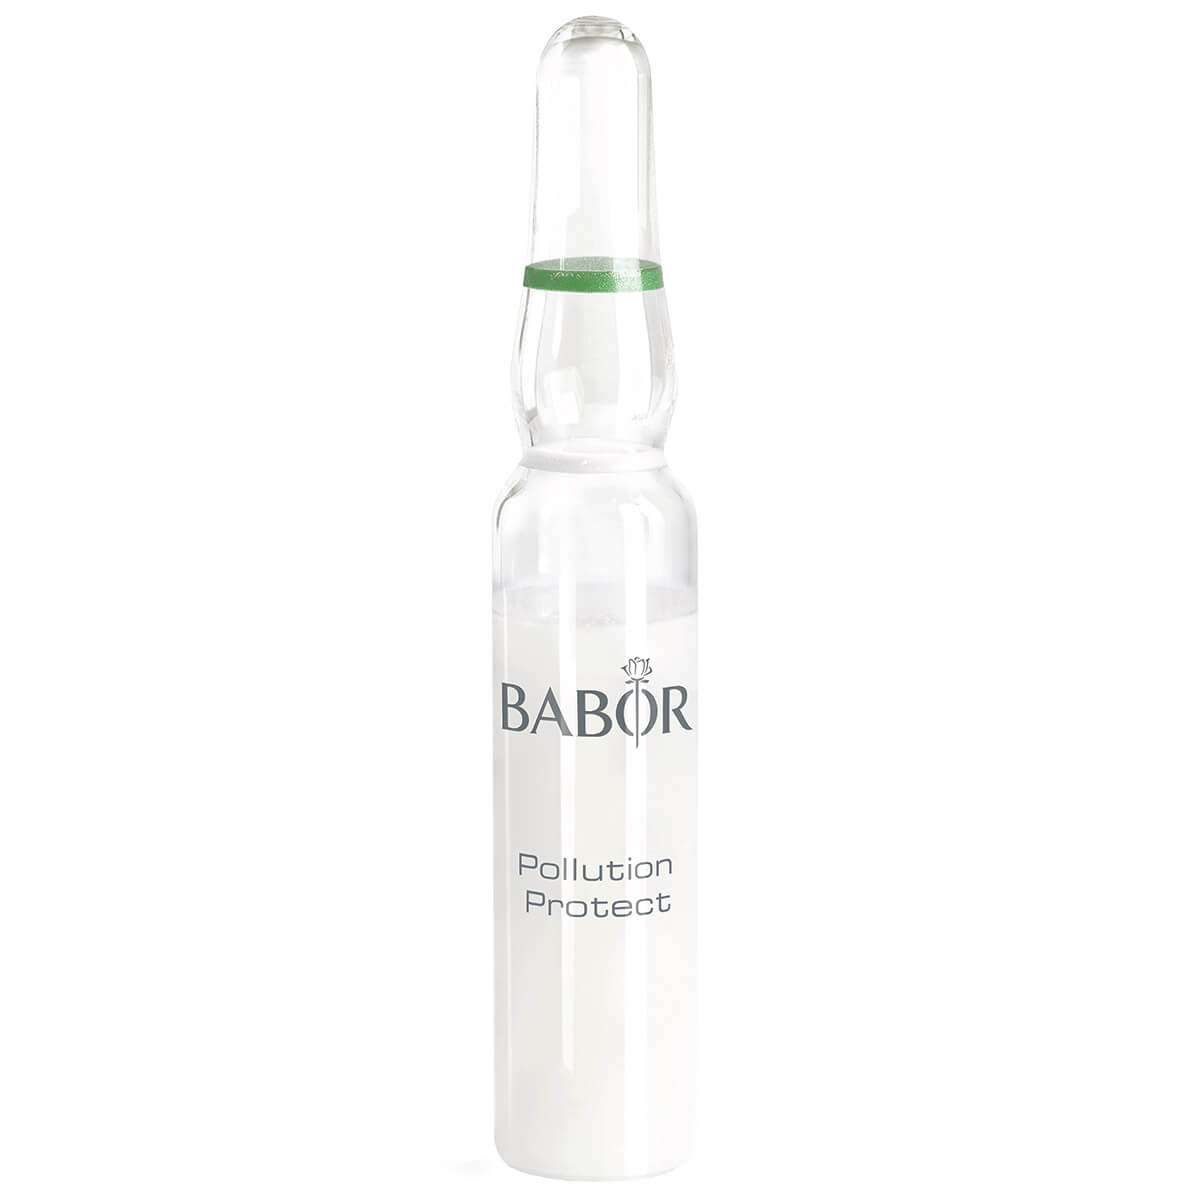 BABOR Pollution Protect Ampoule Concentrate